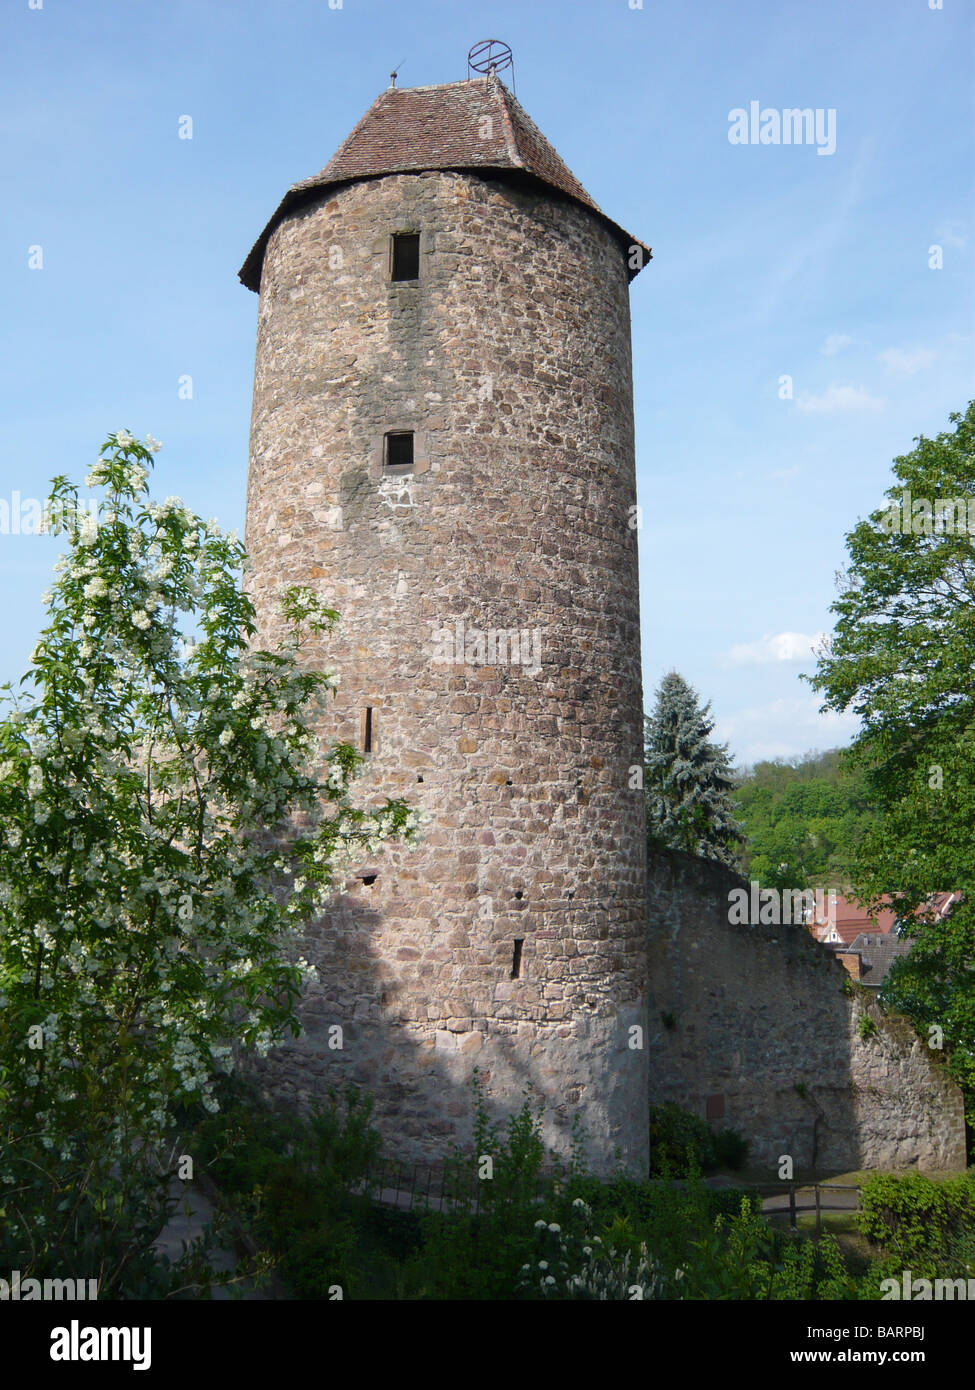 Tower 'Blauer Hut' and city wall,Weinheim, Odenwald, Germany Stock Photo